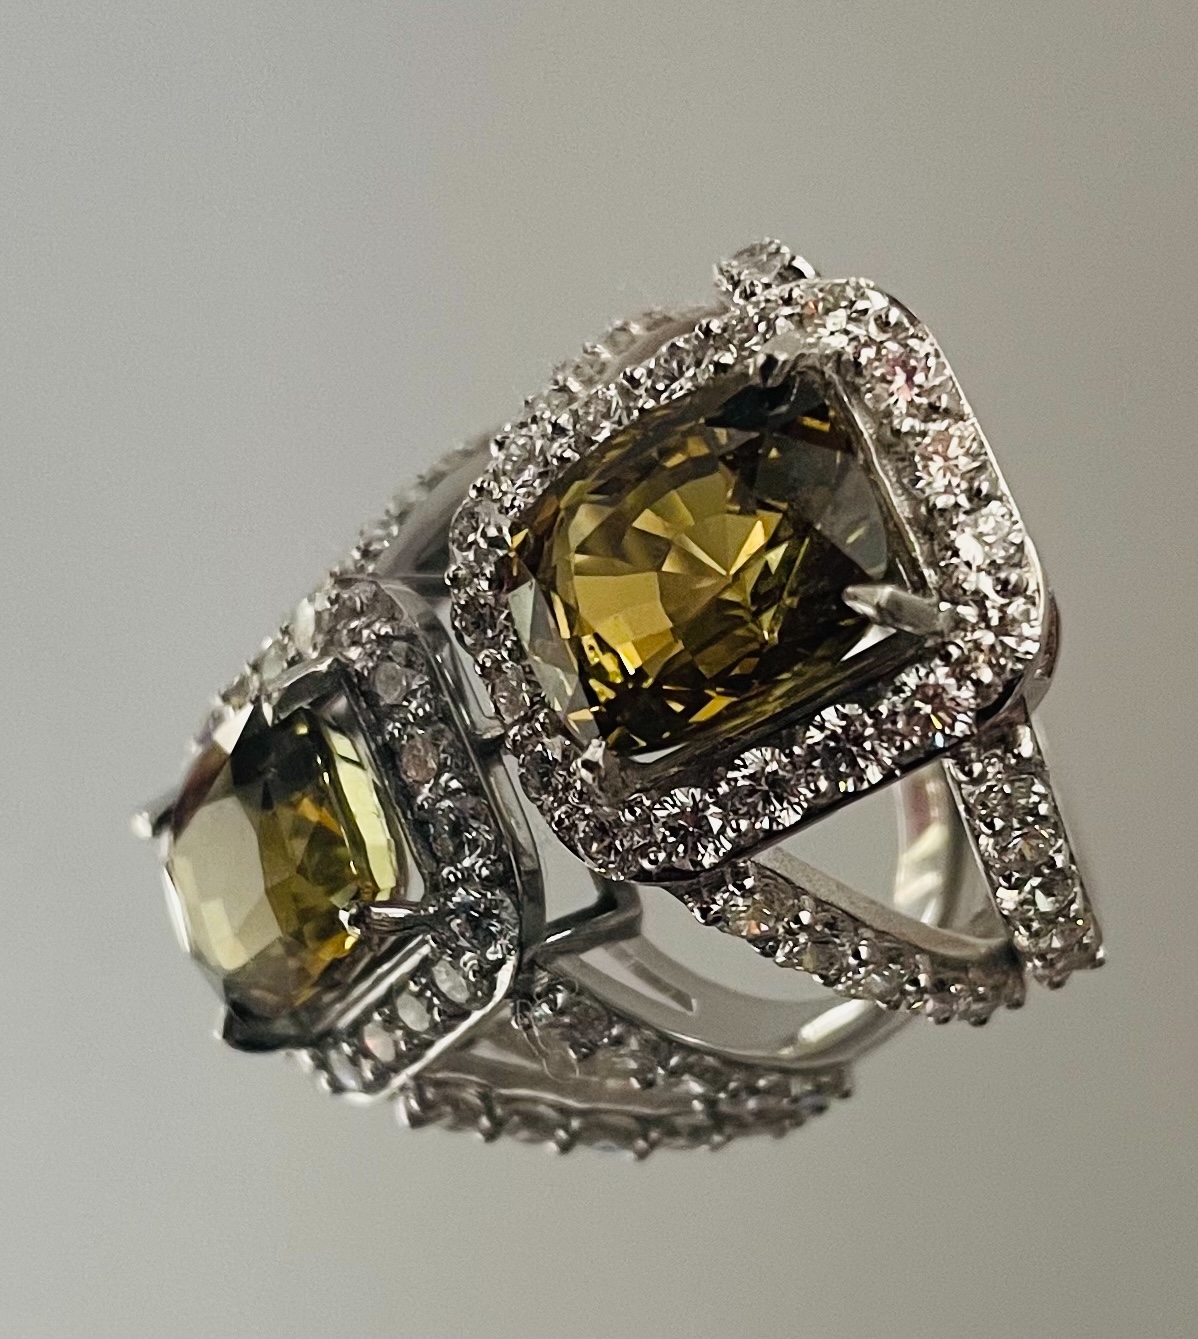 4.17Ct Natural Alexandrite Ring Unheated/Untreated with Diamonds & 18k Gold - Image 5 of 9